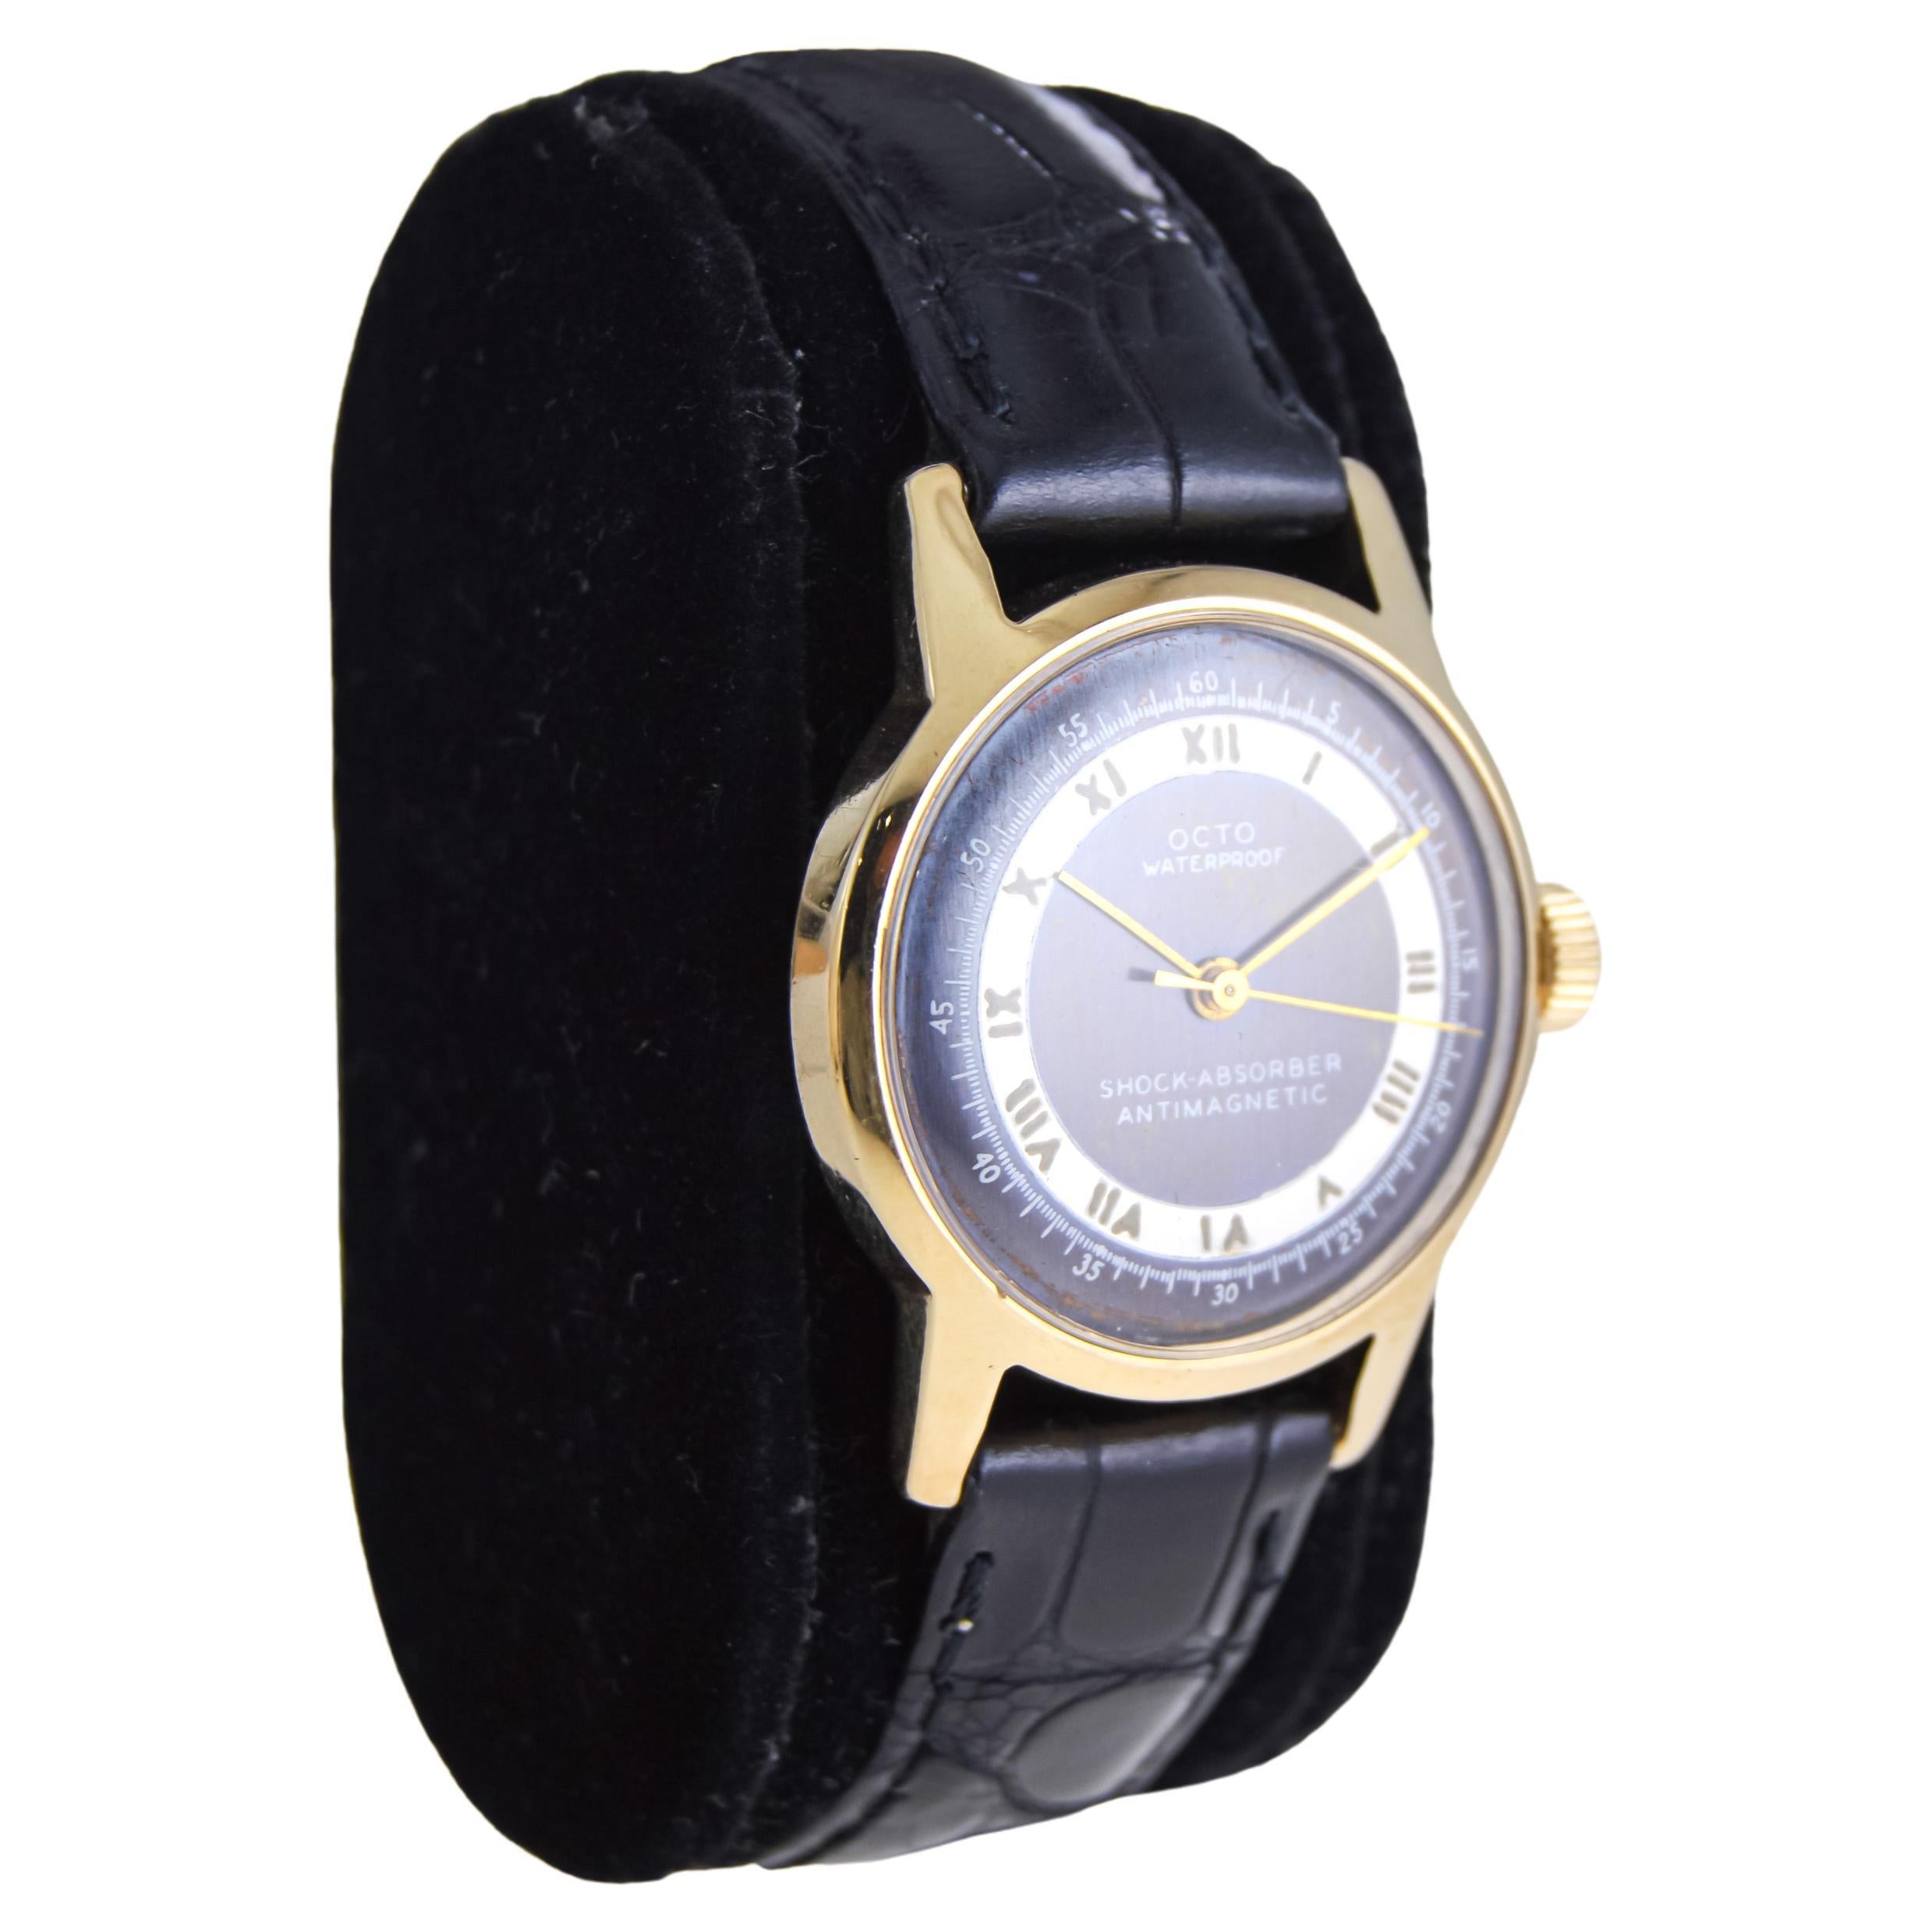 FACTORY / HOUSE: Octo Watch Company 
STYLE / REFERENCE: Round 
METAL / MATERIAL: 14Kt. Solid Gold 
CIRCA / YEAR: 1950's
DIMENSIONS / SIZE:  Length X Diameter
MOVEMENT / CALIBER: Manual Winding / Jewels 
DIAL / HANDS: Original Two Tone Charcoal and